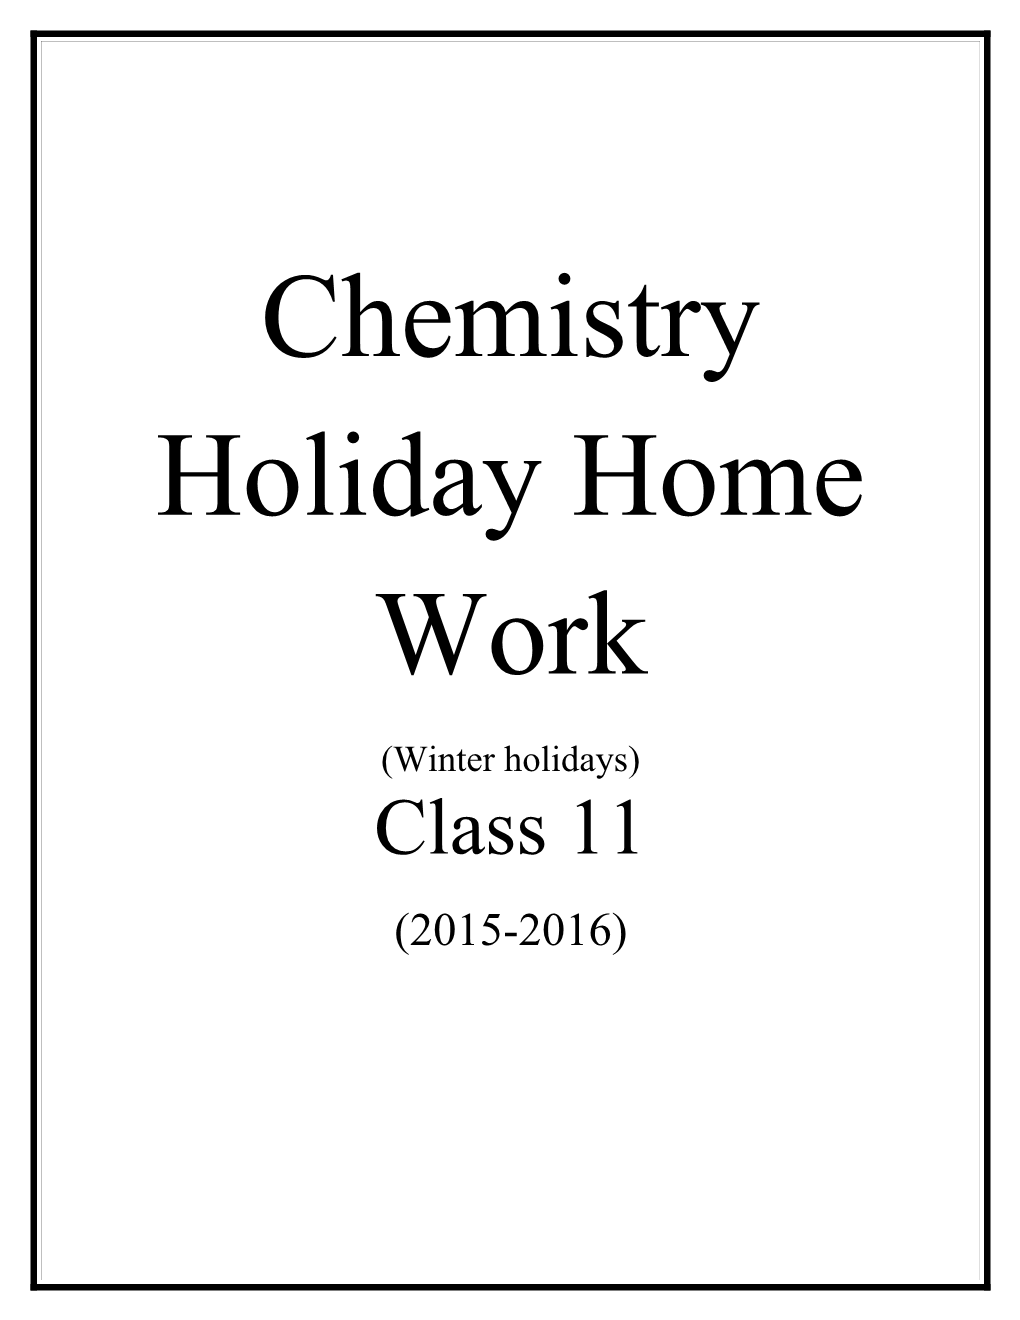 Chemistry Holiday Home Work